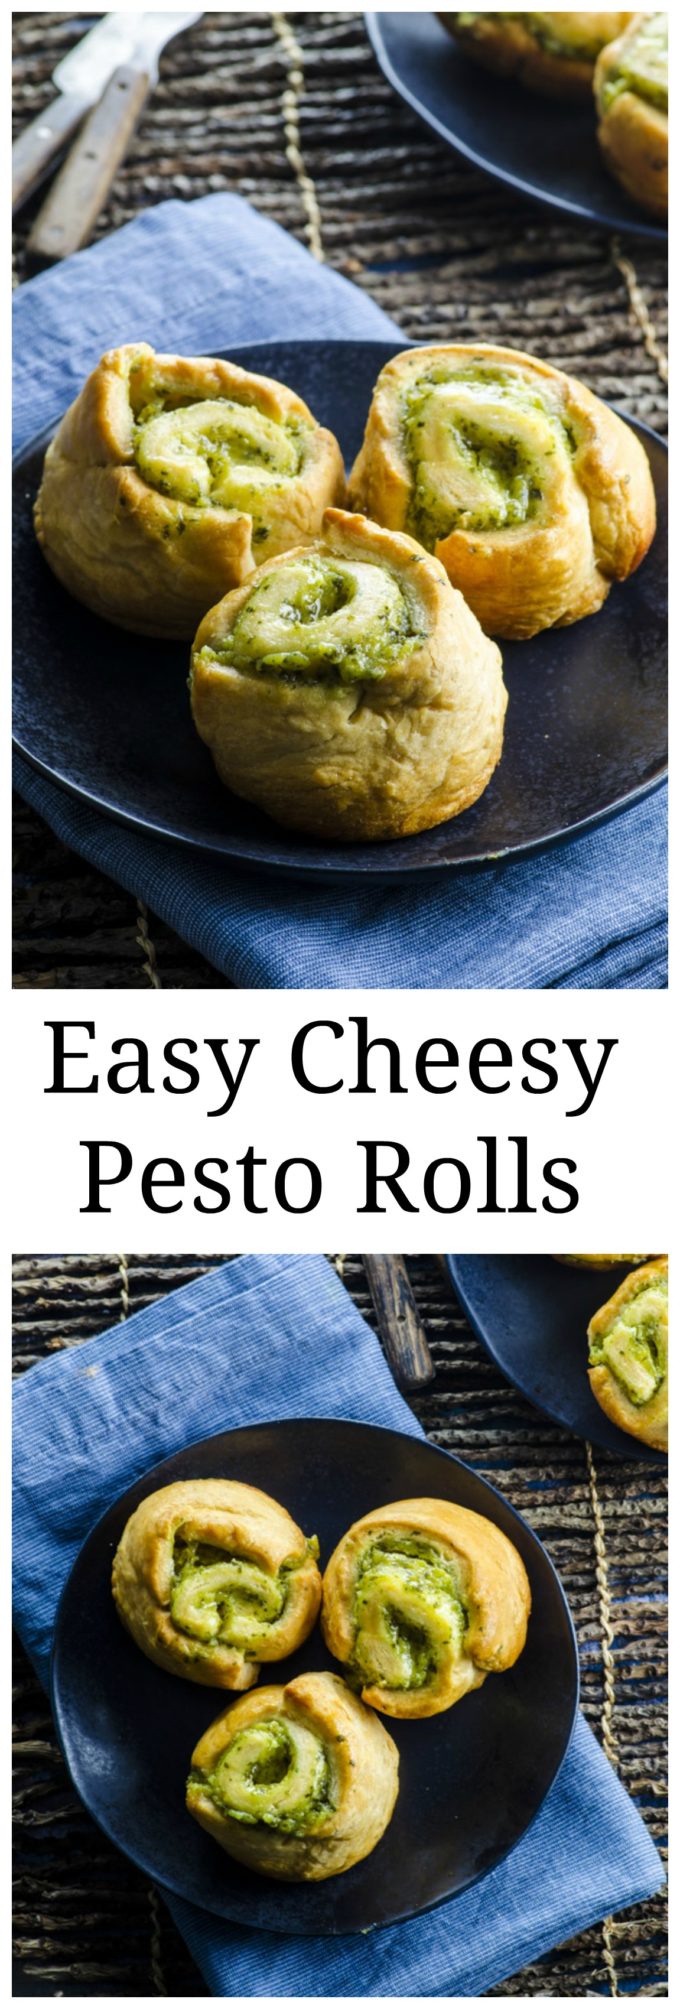 February is Lactose Intolerance Awareness Month, and these vegan Easy Cheesy Pesto Rolls are the perfect way to celebrate!